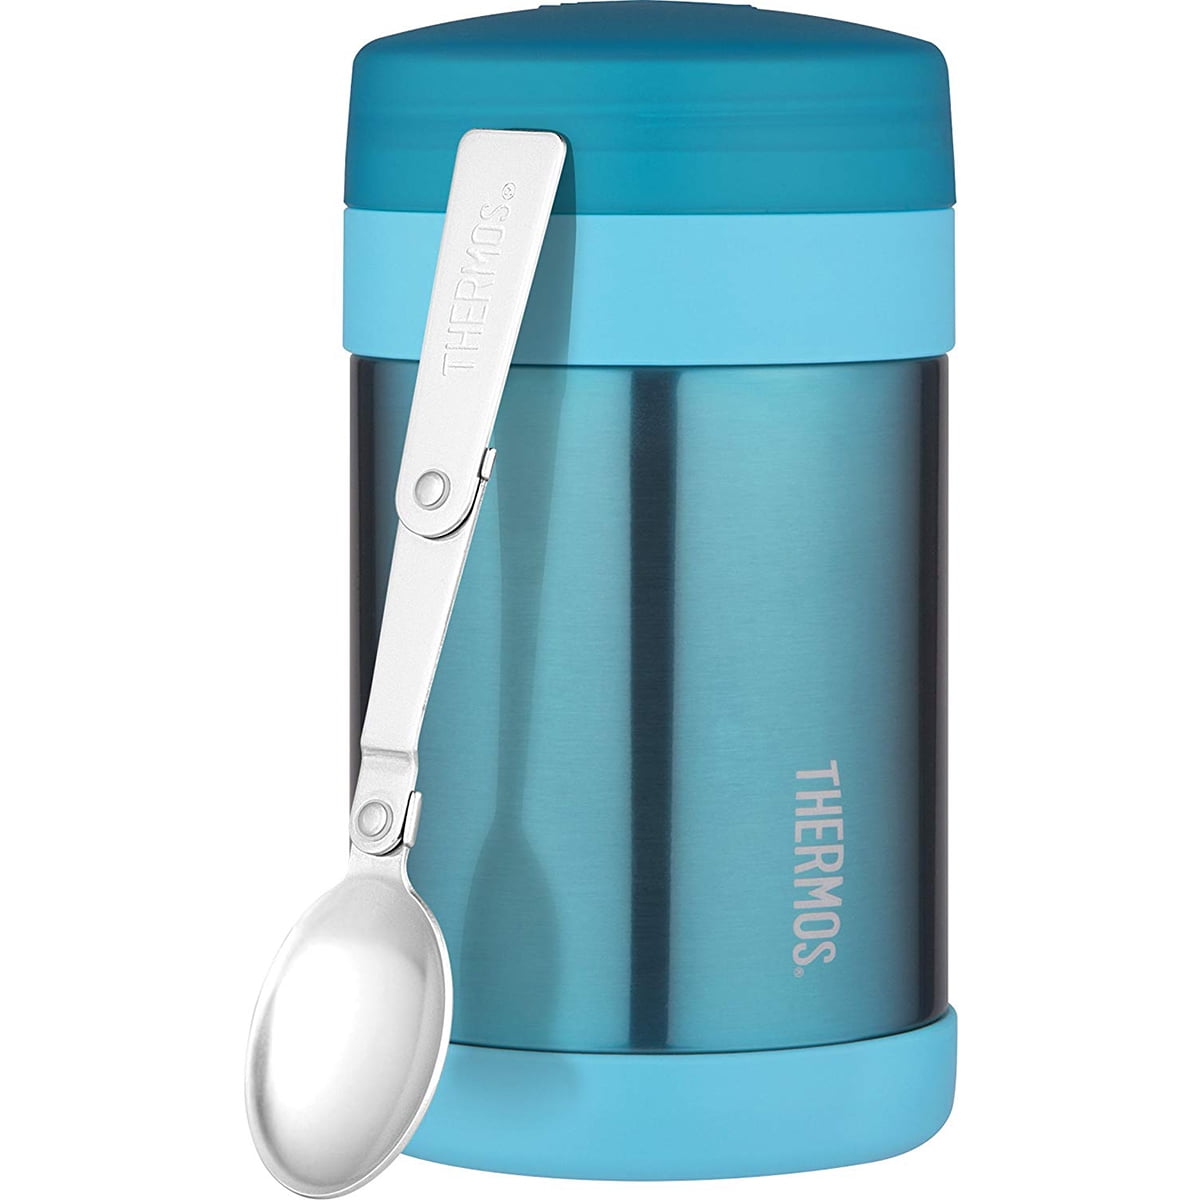 Thermos Stainless Steel 16oz 470ml Food Jar with Folding Spoon